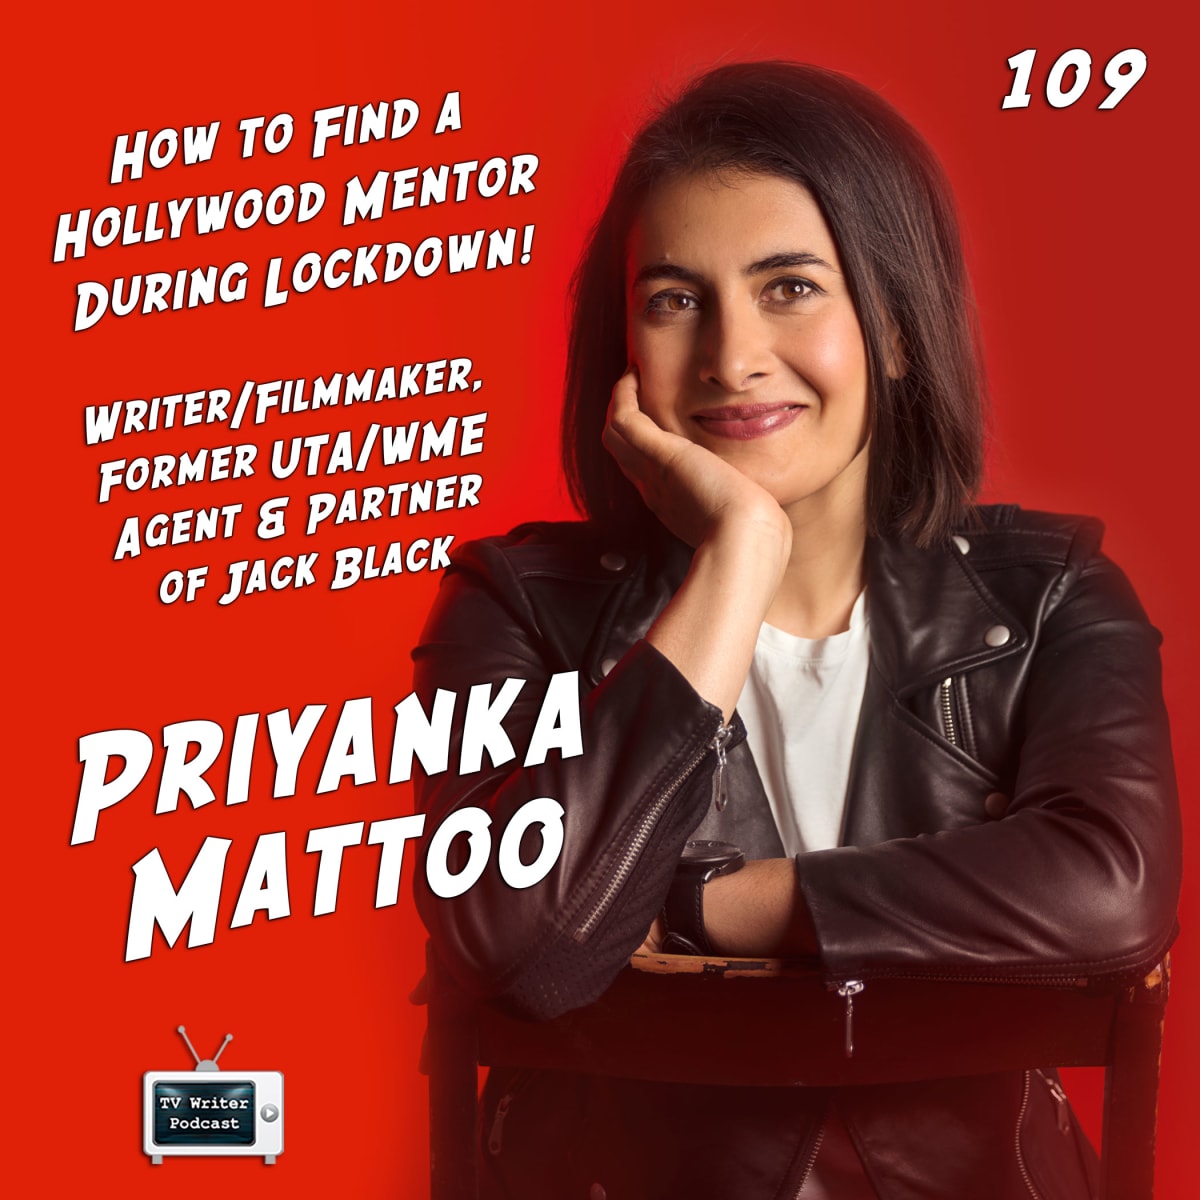 TV Writer Podcast 109 - Priyanka Mattoo - How to Find a Hollywood Mentor During Lockdown